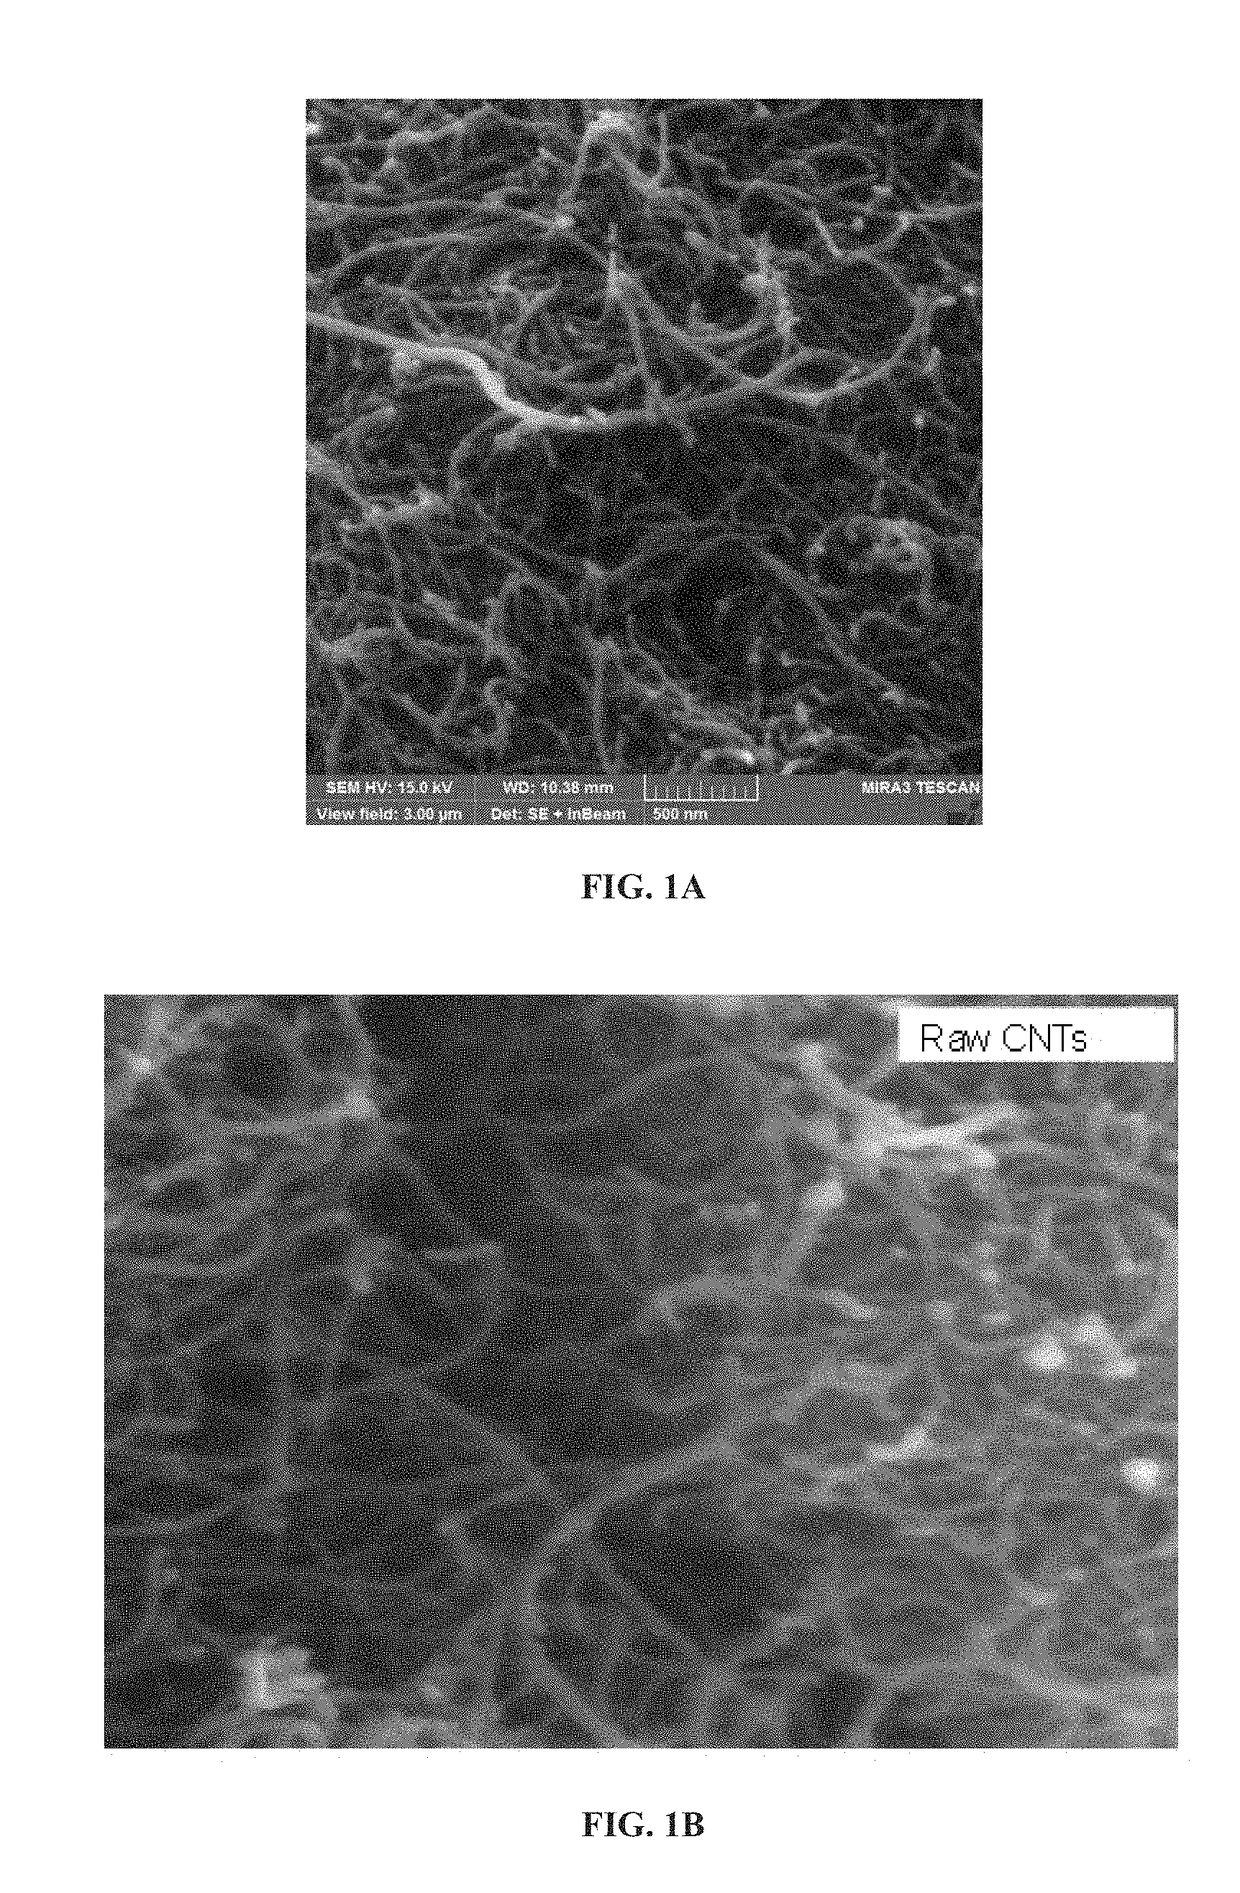 Adsorption of aromatic hydrocarbons from water using metal oxide impregnated carbon nanotubes